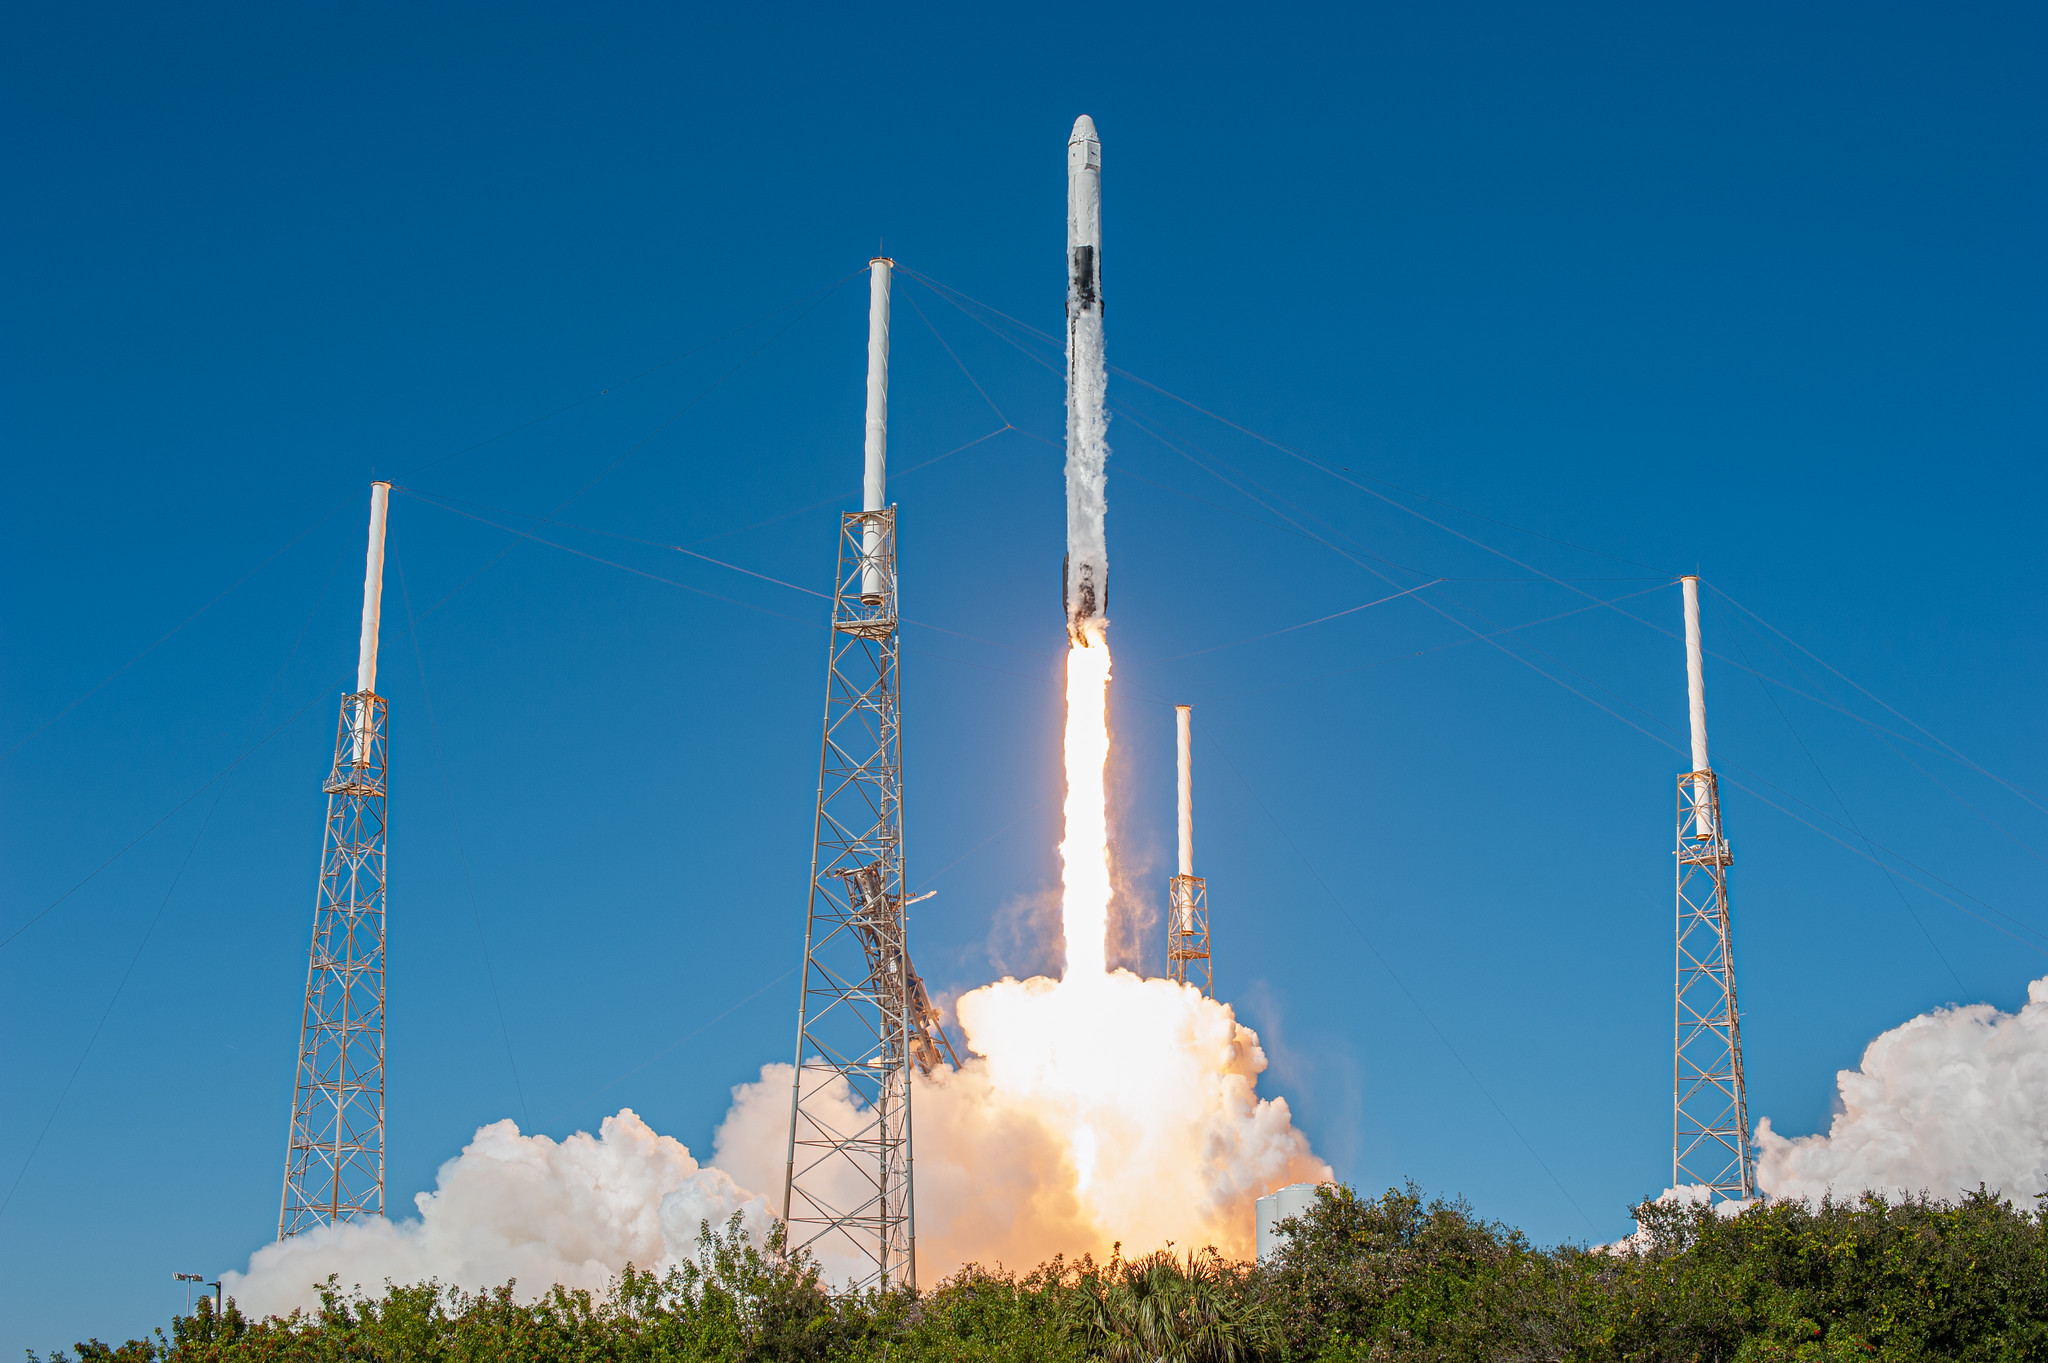  The SpaceX Falcon 9 rocket with the Dragon cargo module lifts off Space Launch Complex 40 on Cape Canaveral Air Force Station i